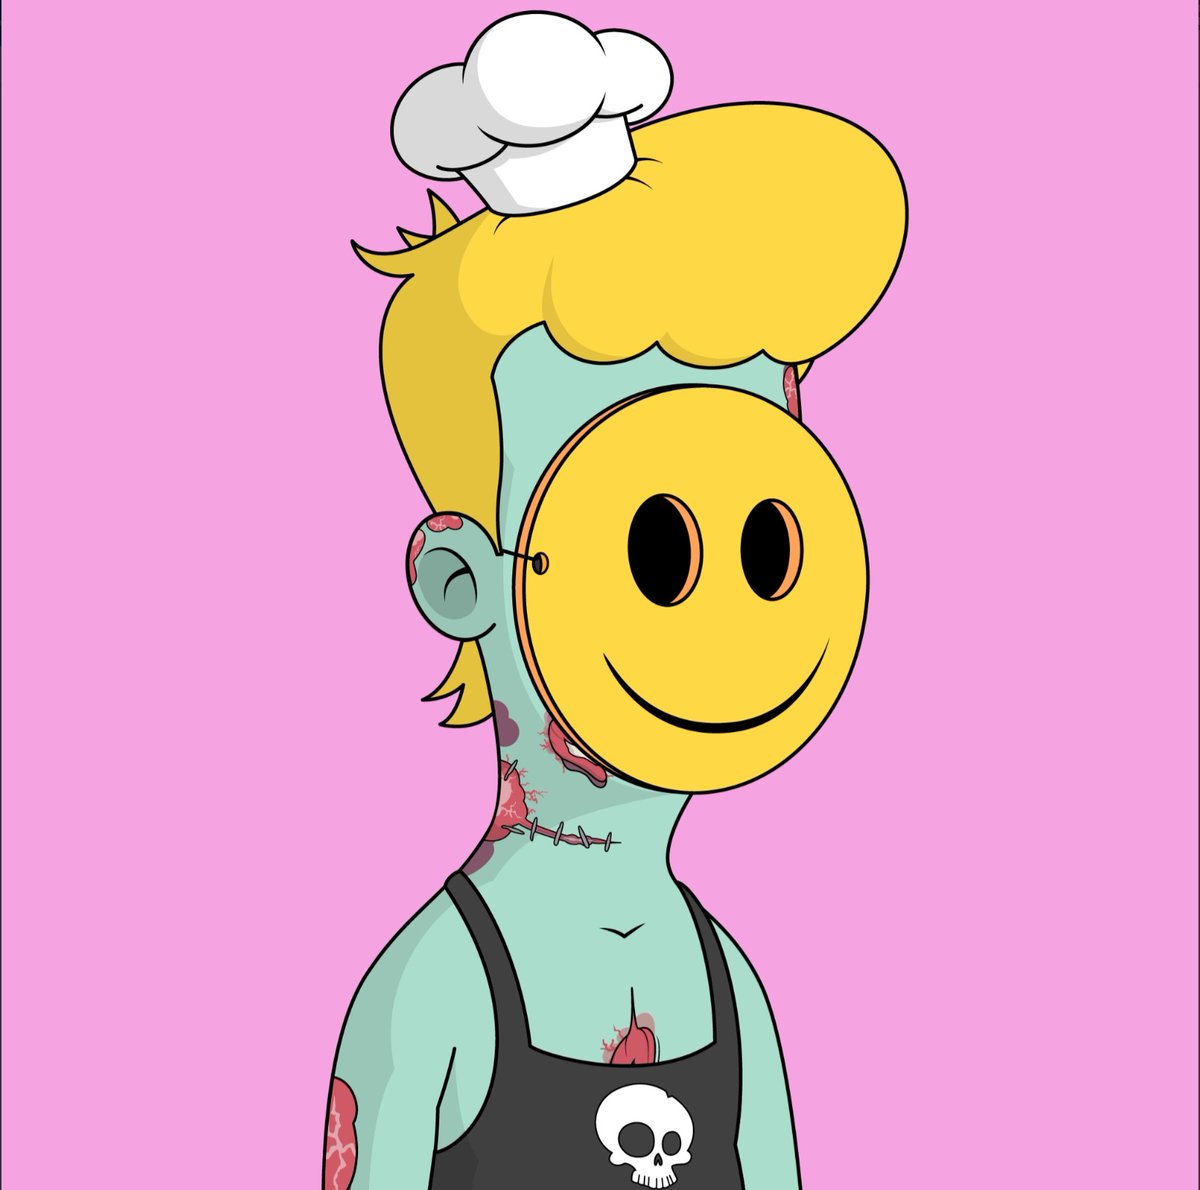 @syntheticos @ToonSquadNFT Can't believe I forgot about the Chef, #SmileSquad #ToonIn